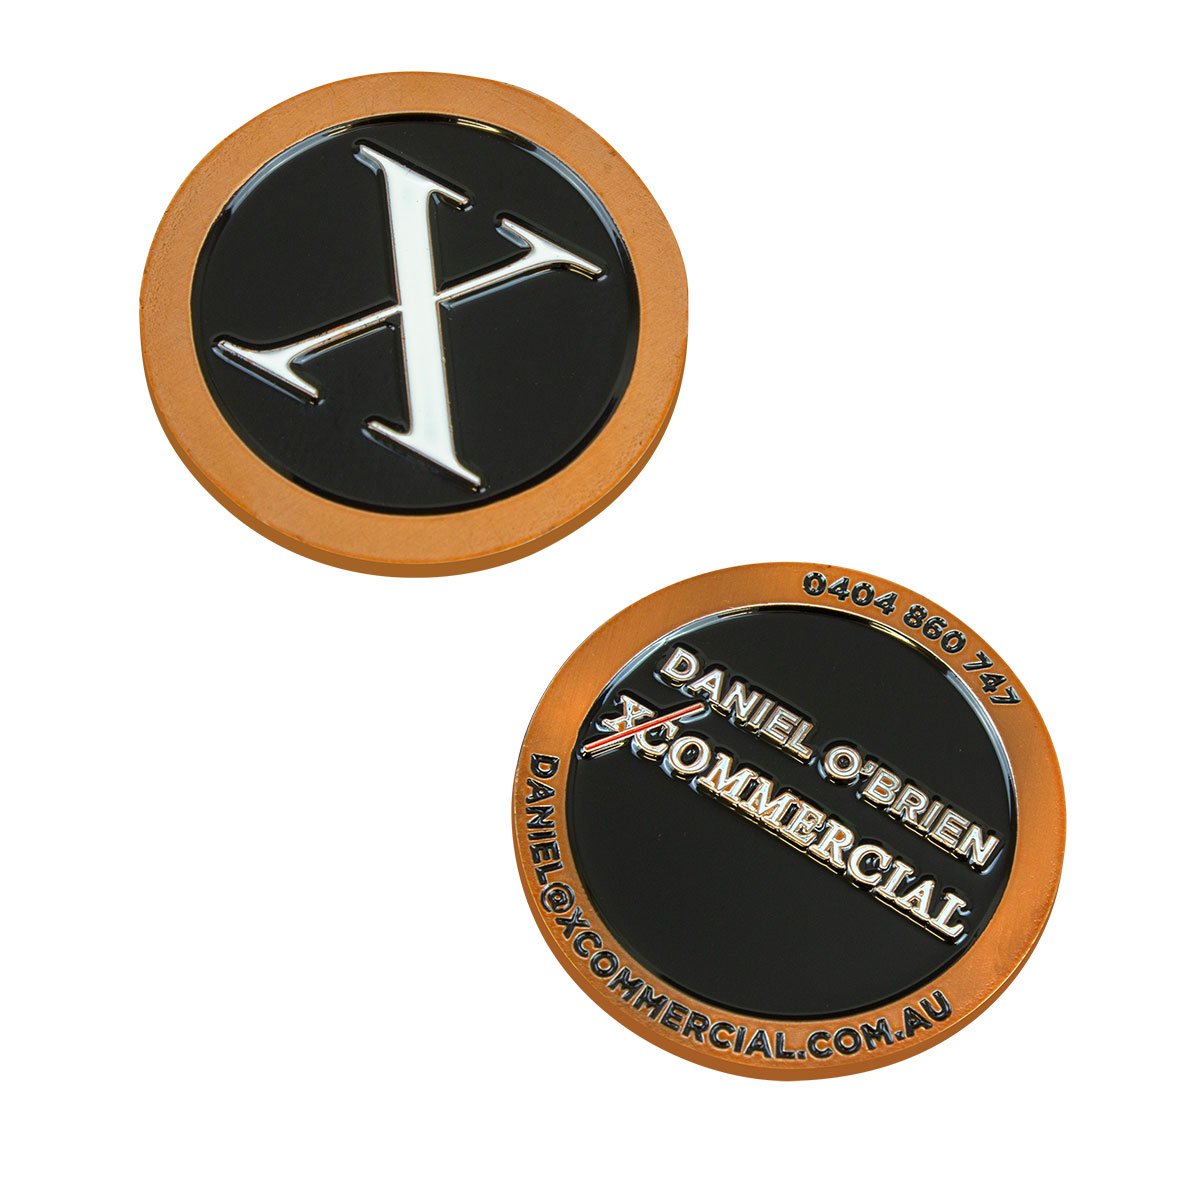 X Commercial Coin